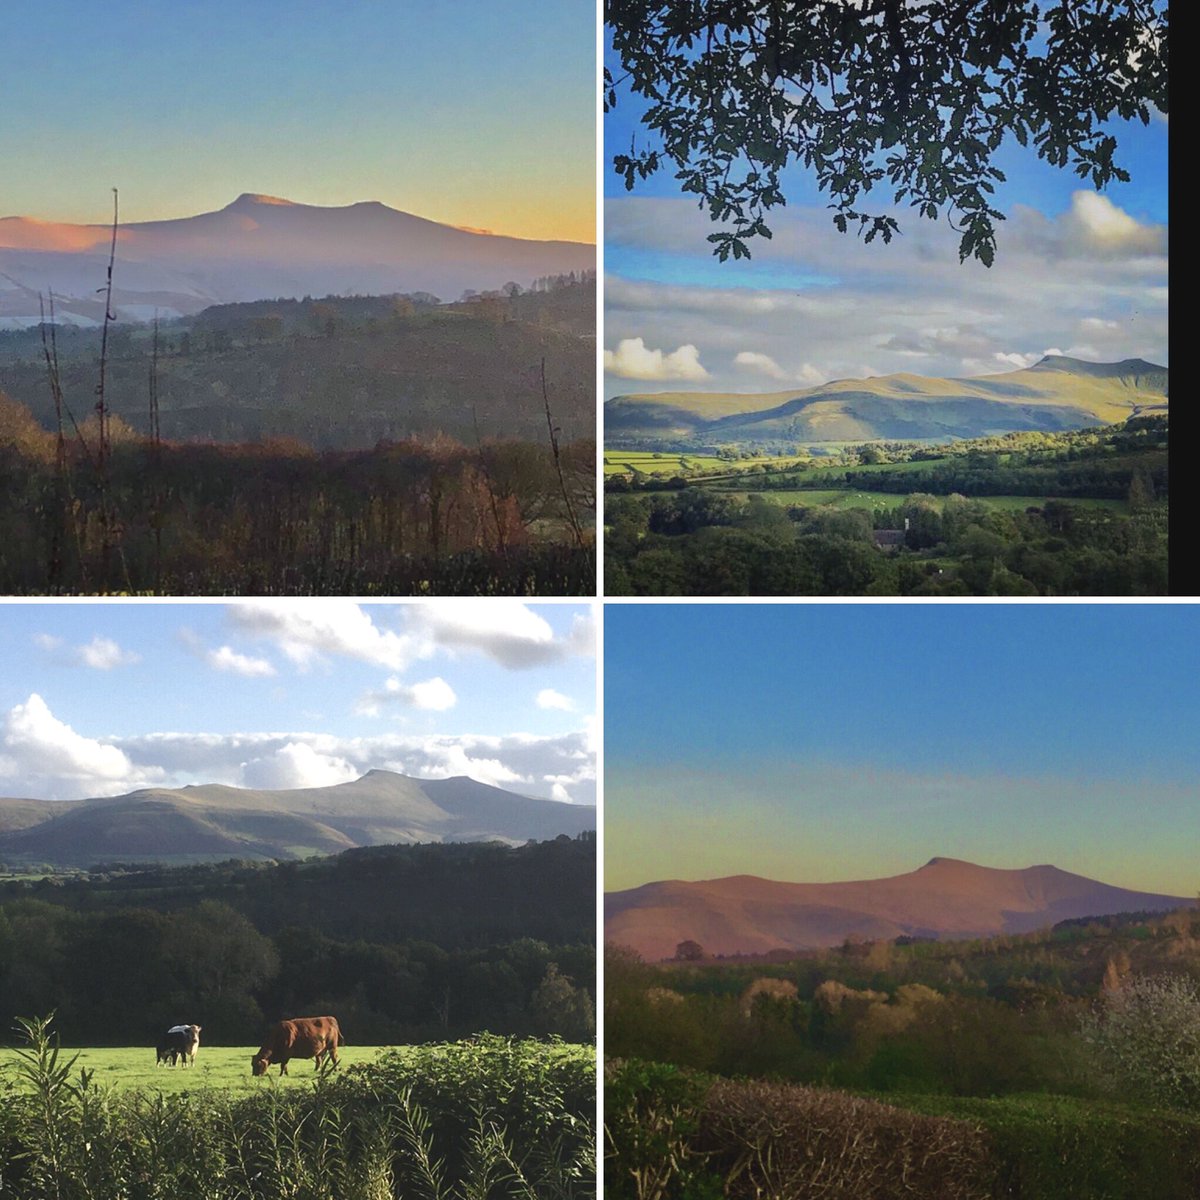 Celebrating our wonderful view of Pen-y-Fan as it’s #InternationalMountainDay! #bedwithaview #MountainsMatter #mountain @theacornhut #walesmustsee #scenicbritain #wowviews #discovercymru